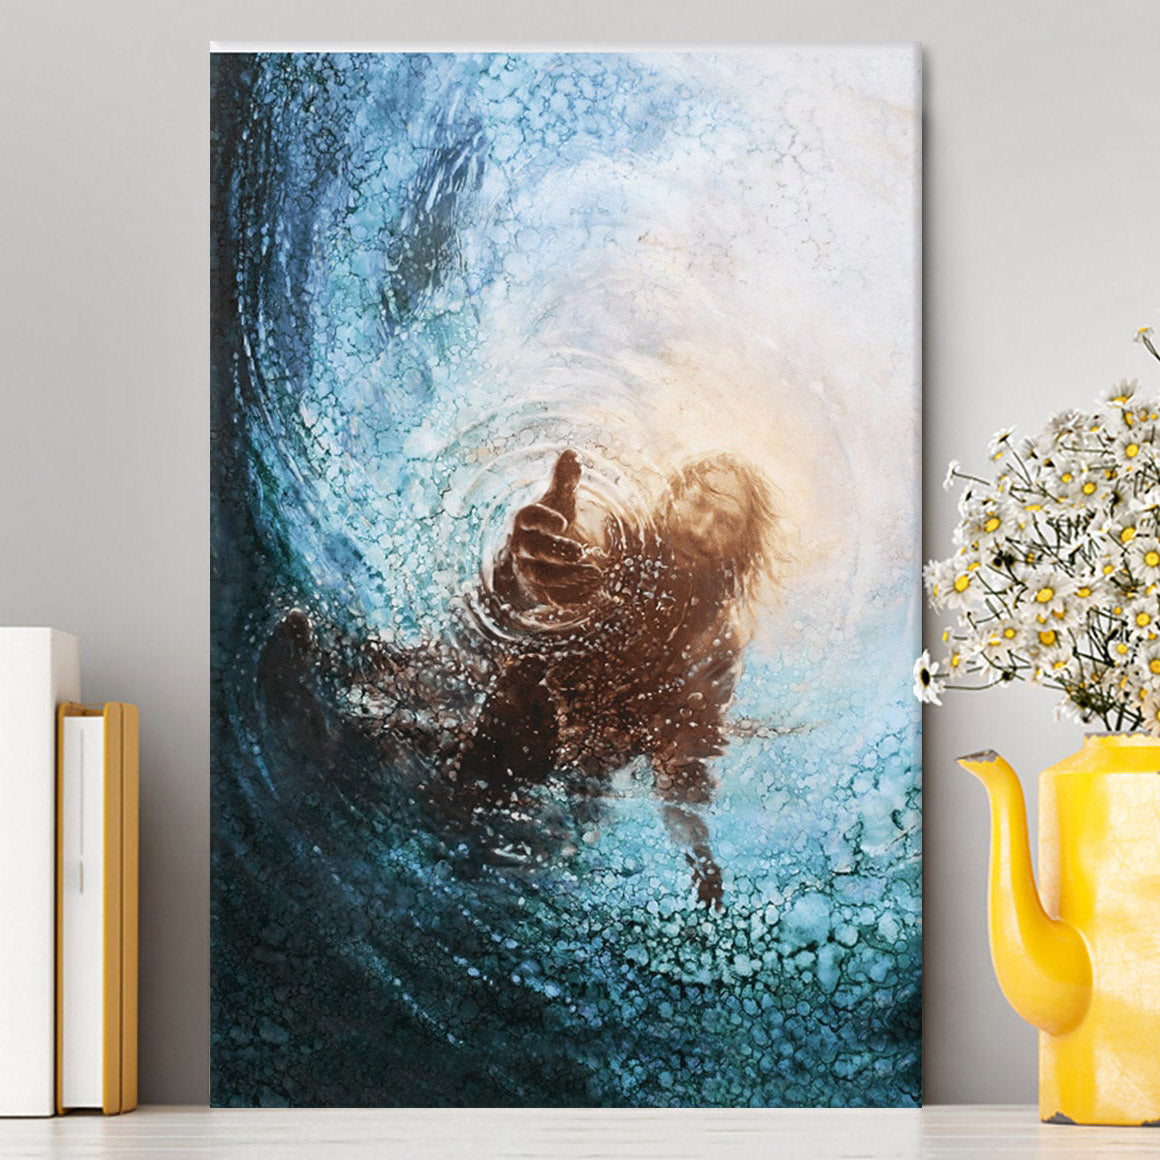 The Hand Of God In Water Canvas Prints - Christian Wall Decor - Bible Verse Canvas Art